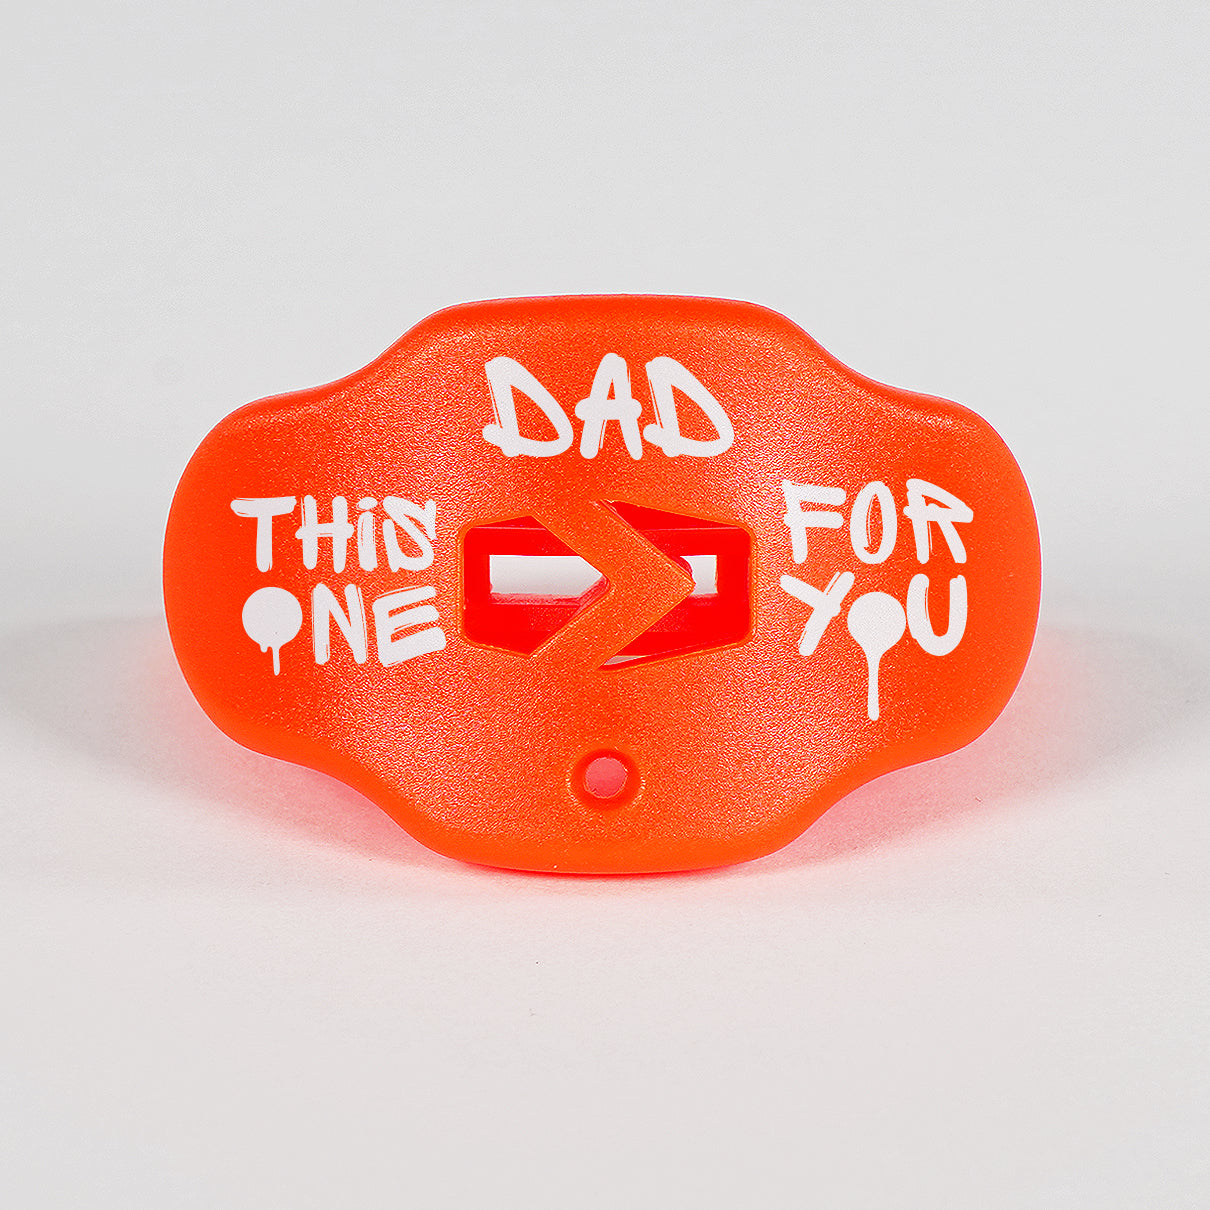 Dad This One for You Hue Orange Football Mouthguard